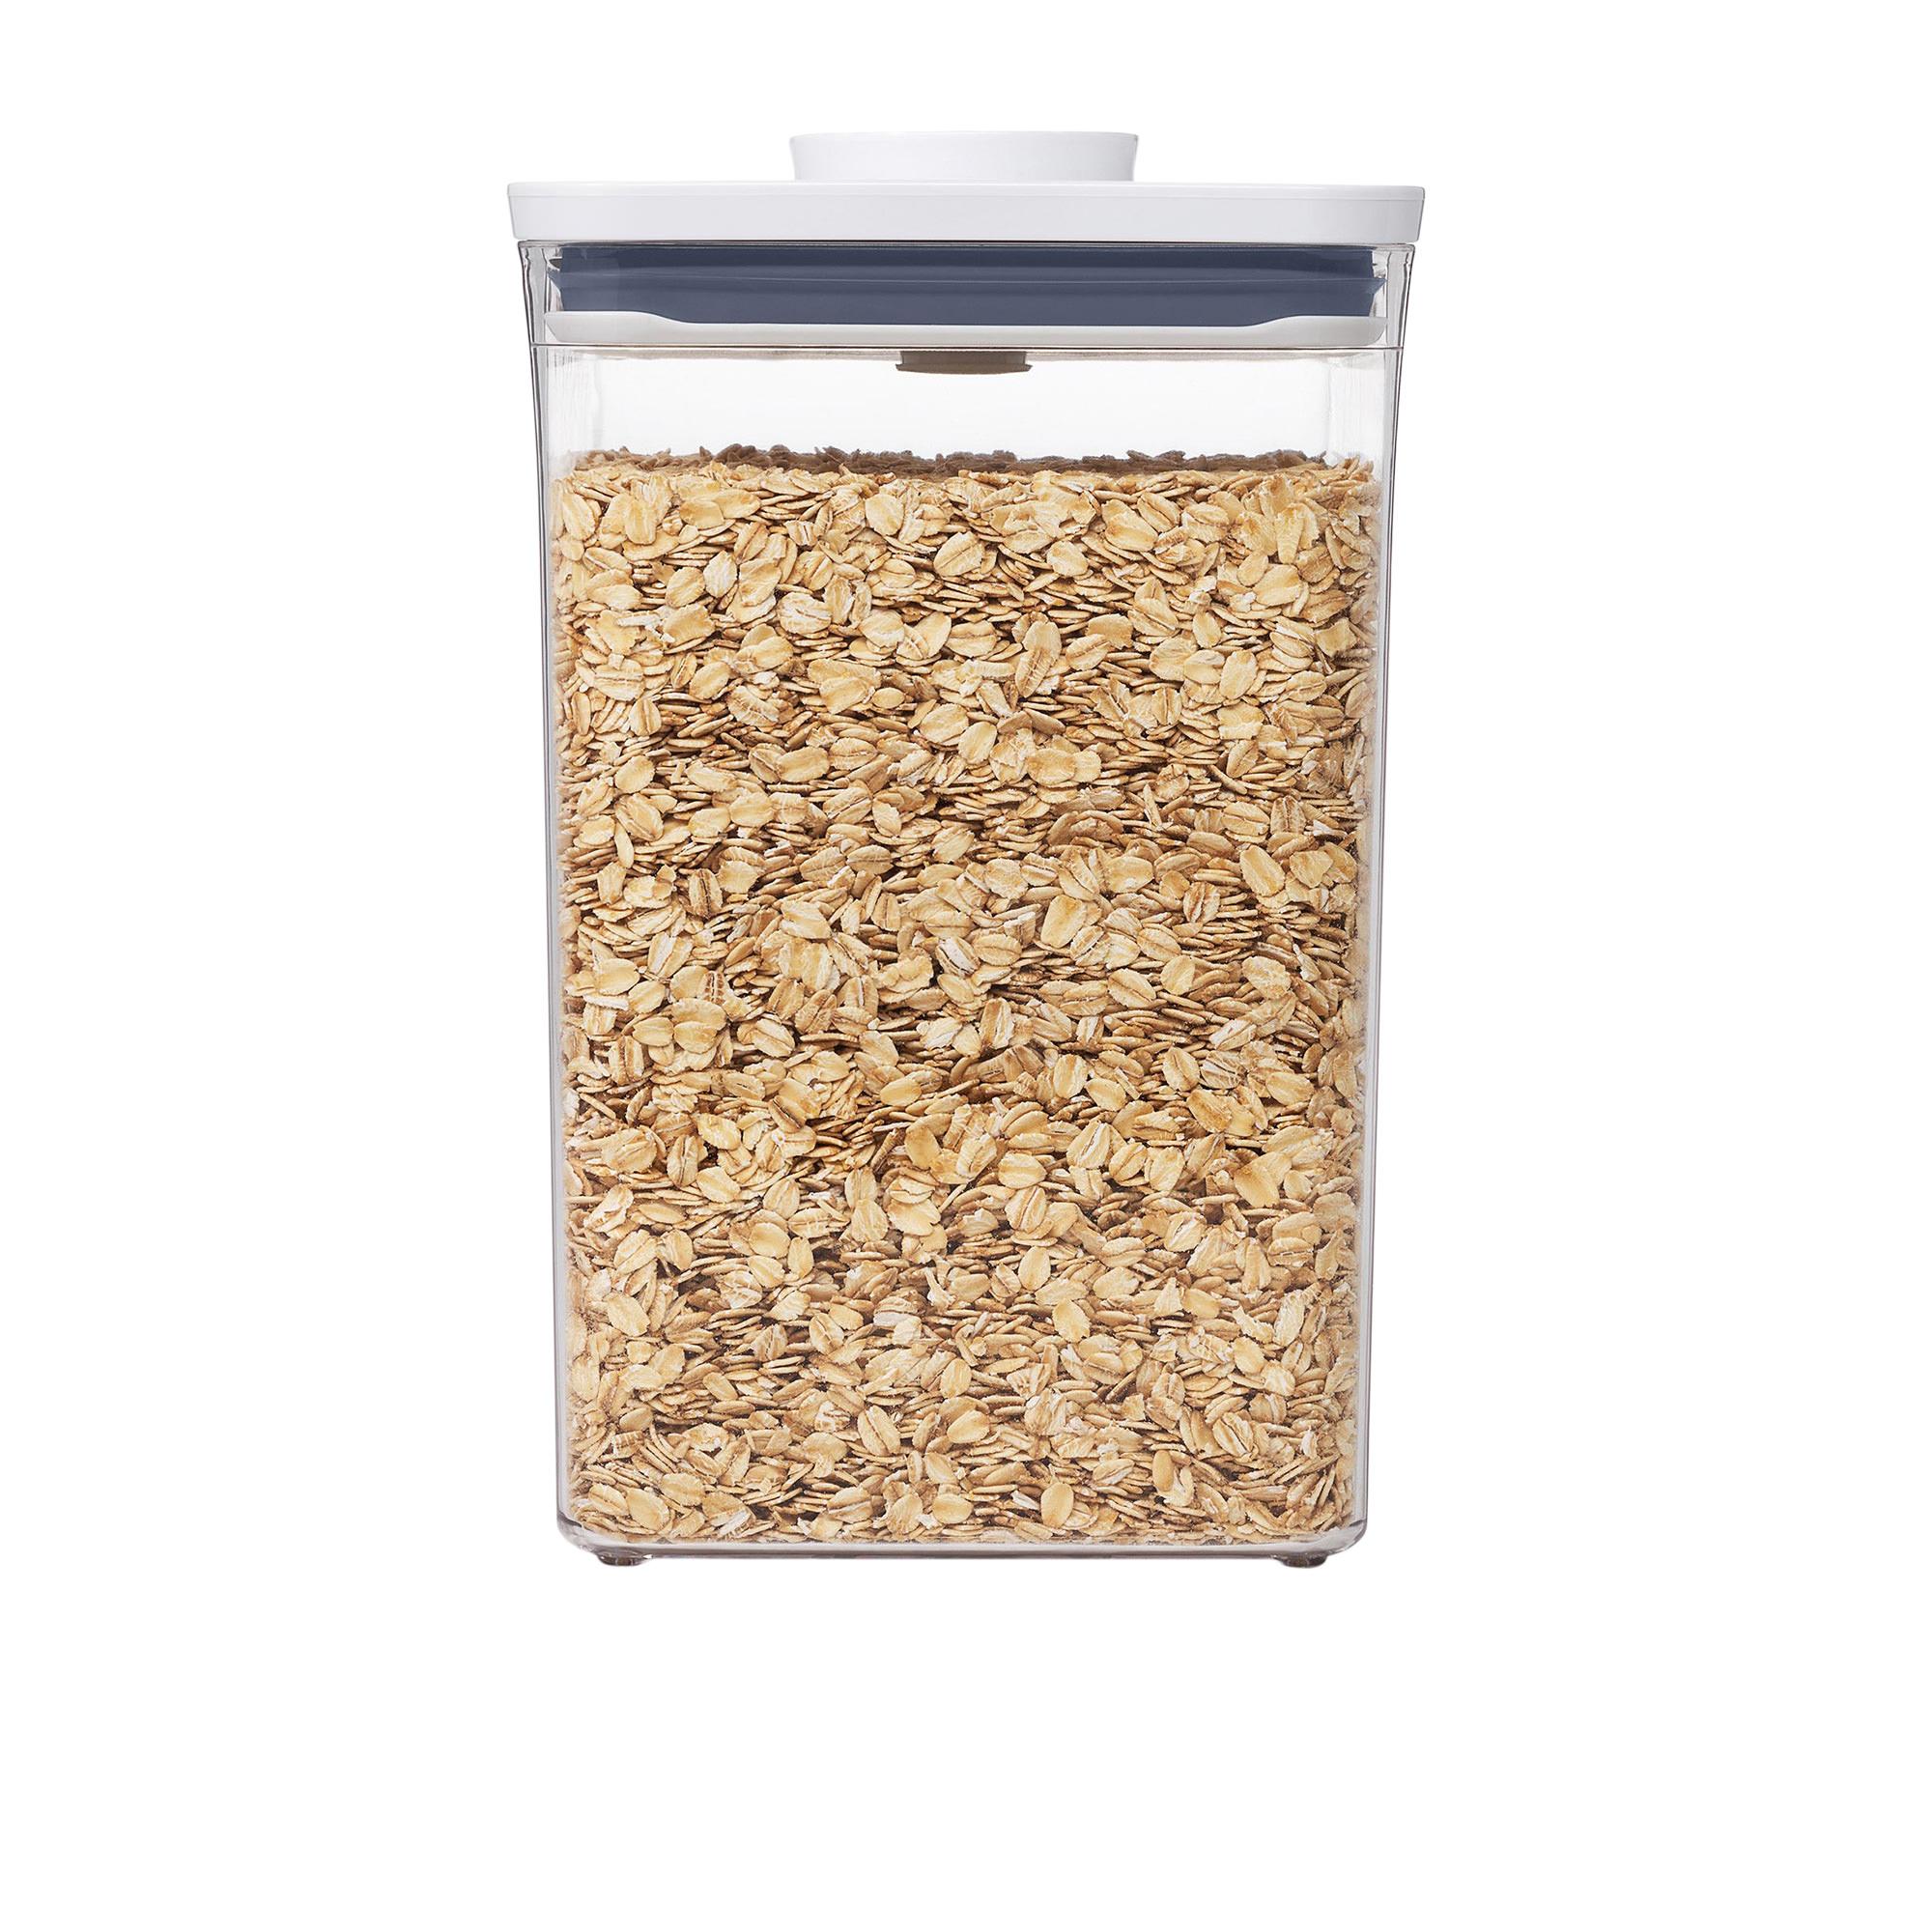 OXO Good Grips Square Pop 2.0 Container 4.2L Image 6